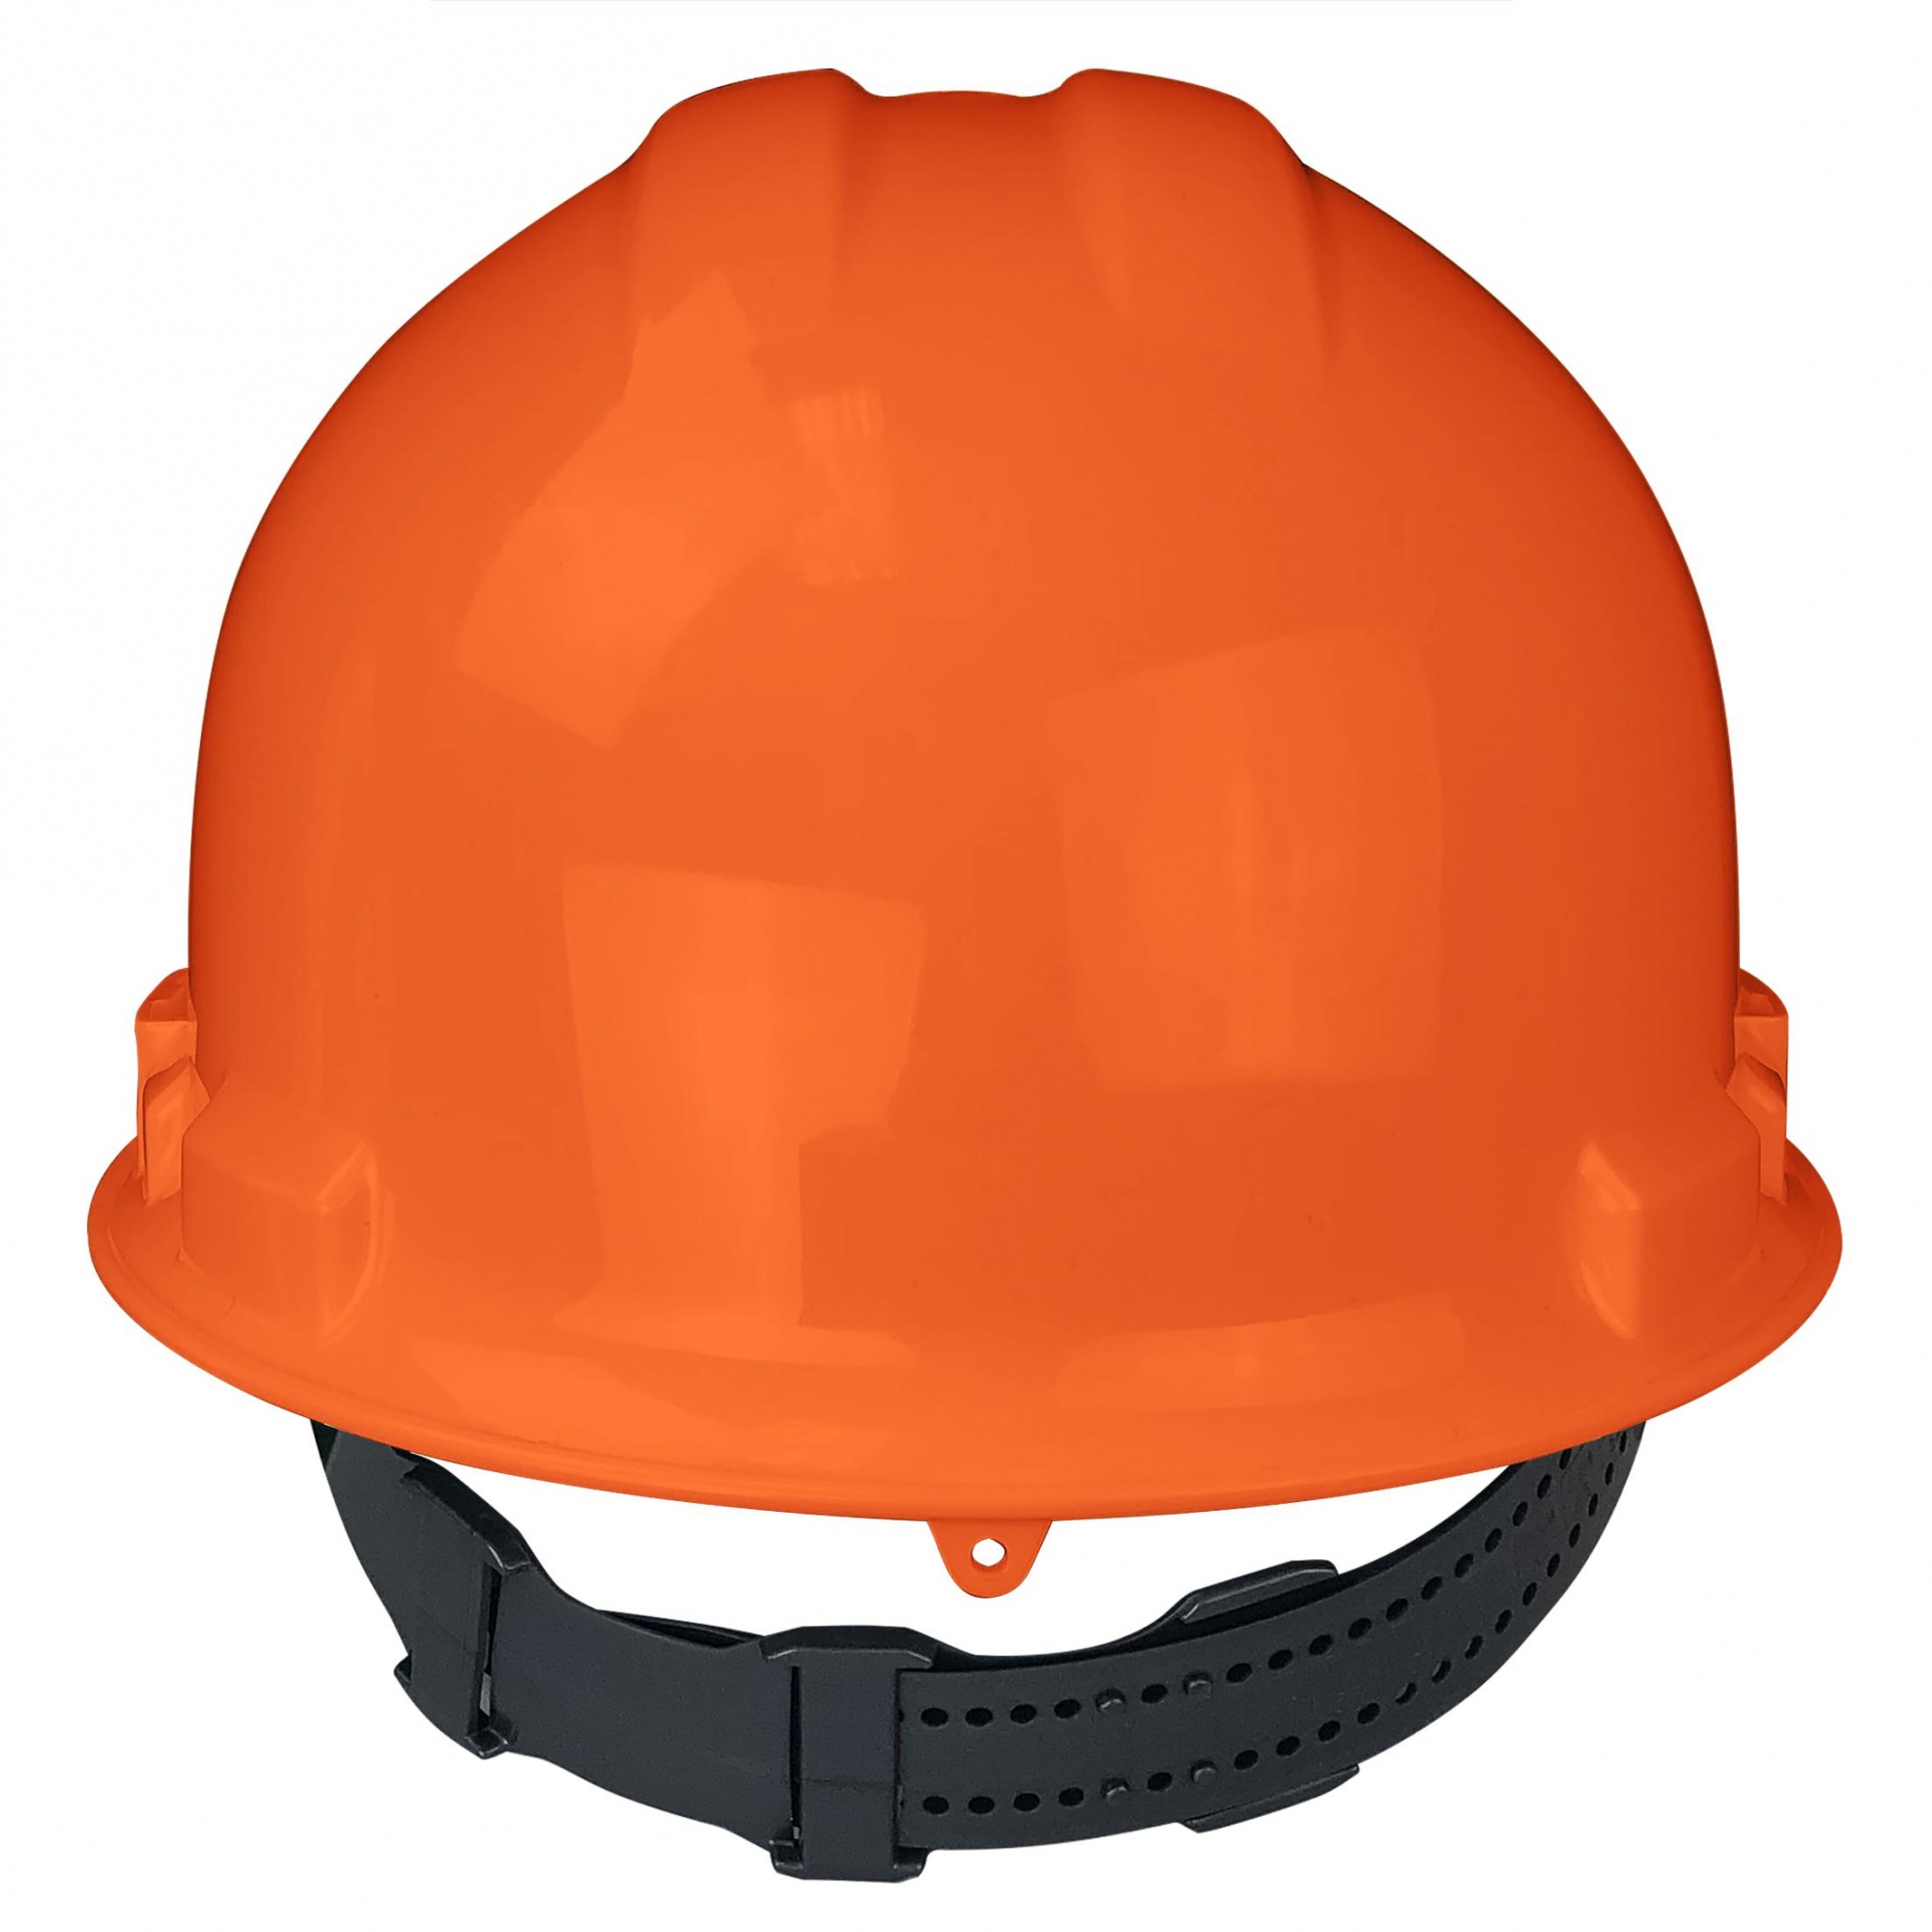 Radians GHP6-YELLOW Granite Cap Style Protective Hard Hat with 6 Point Pinlock Suspension